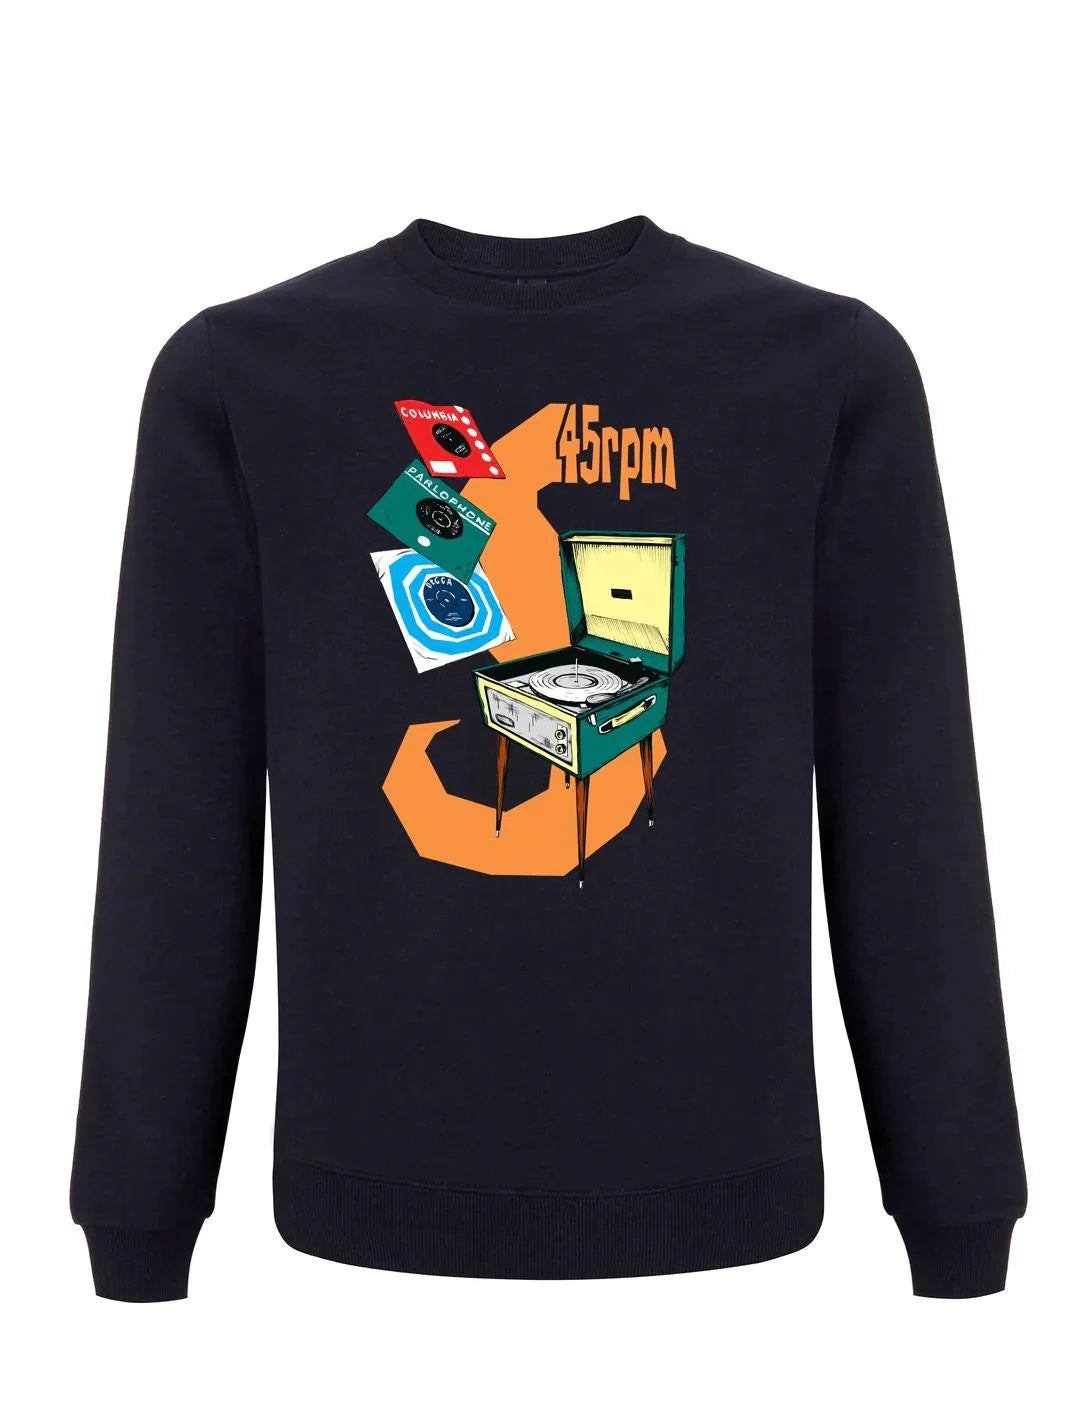 45 RPM: Sweatshirt Inspired by Record Collecting - SOUND IS COLOUR